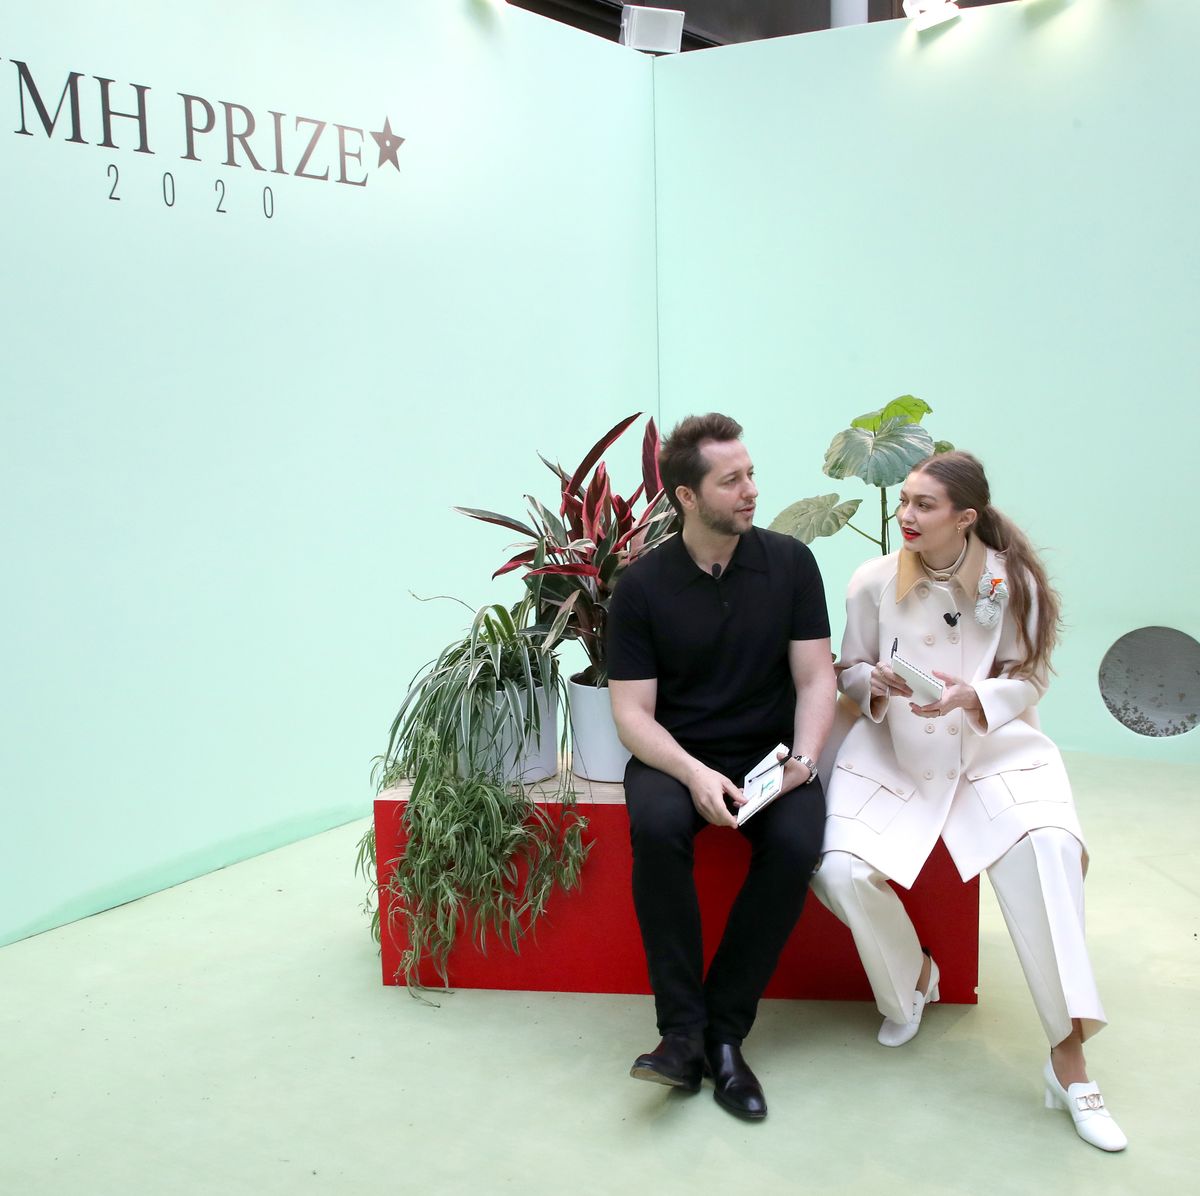 This year's LVMH Prize will be split between the finalists